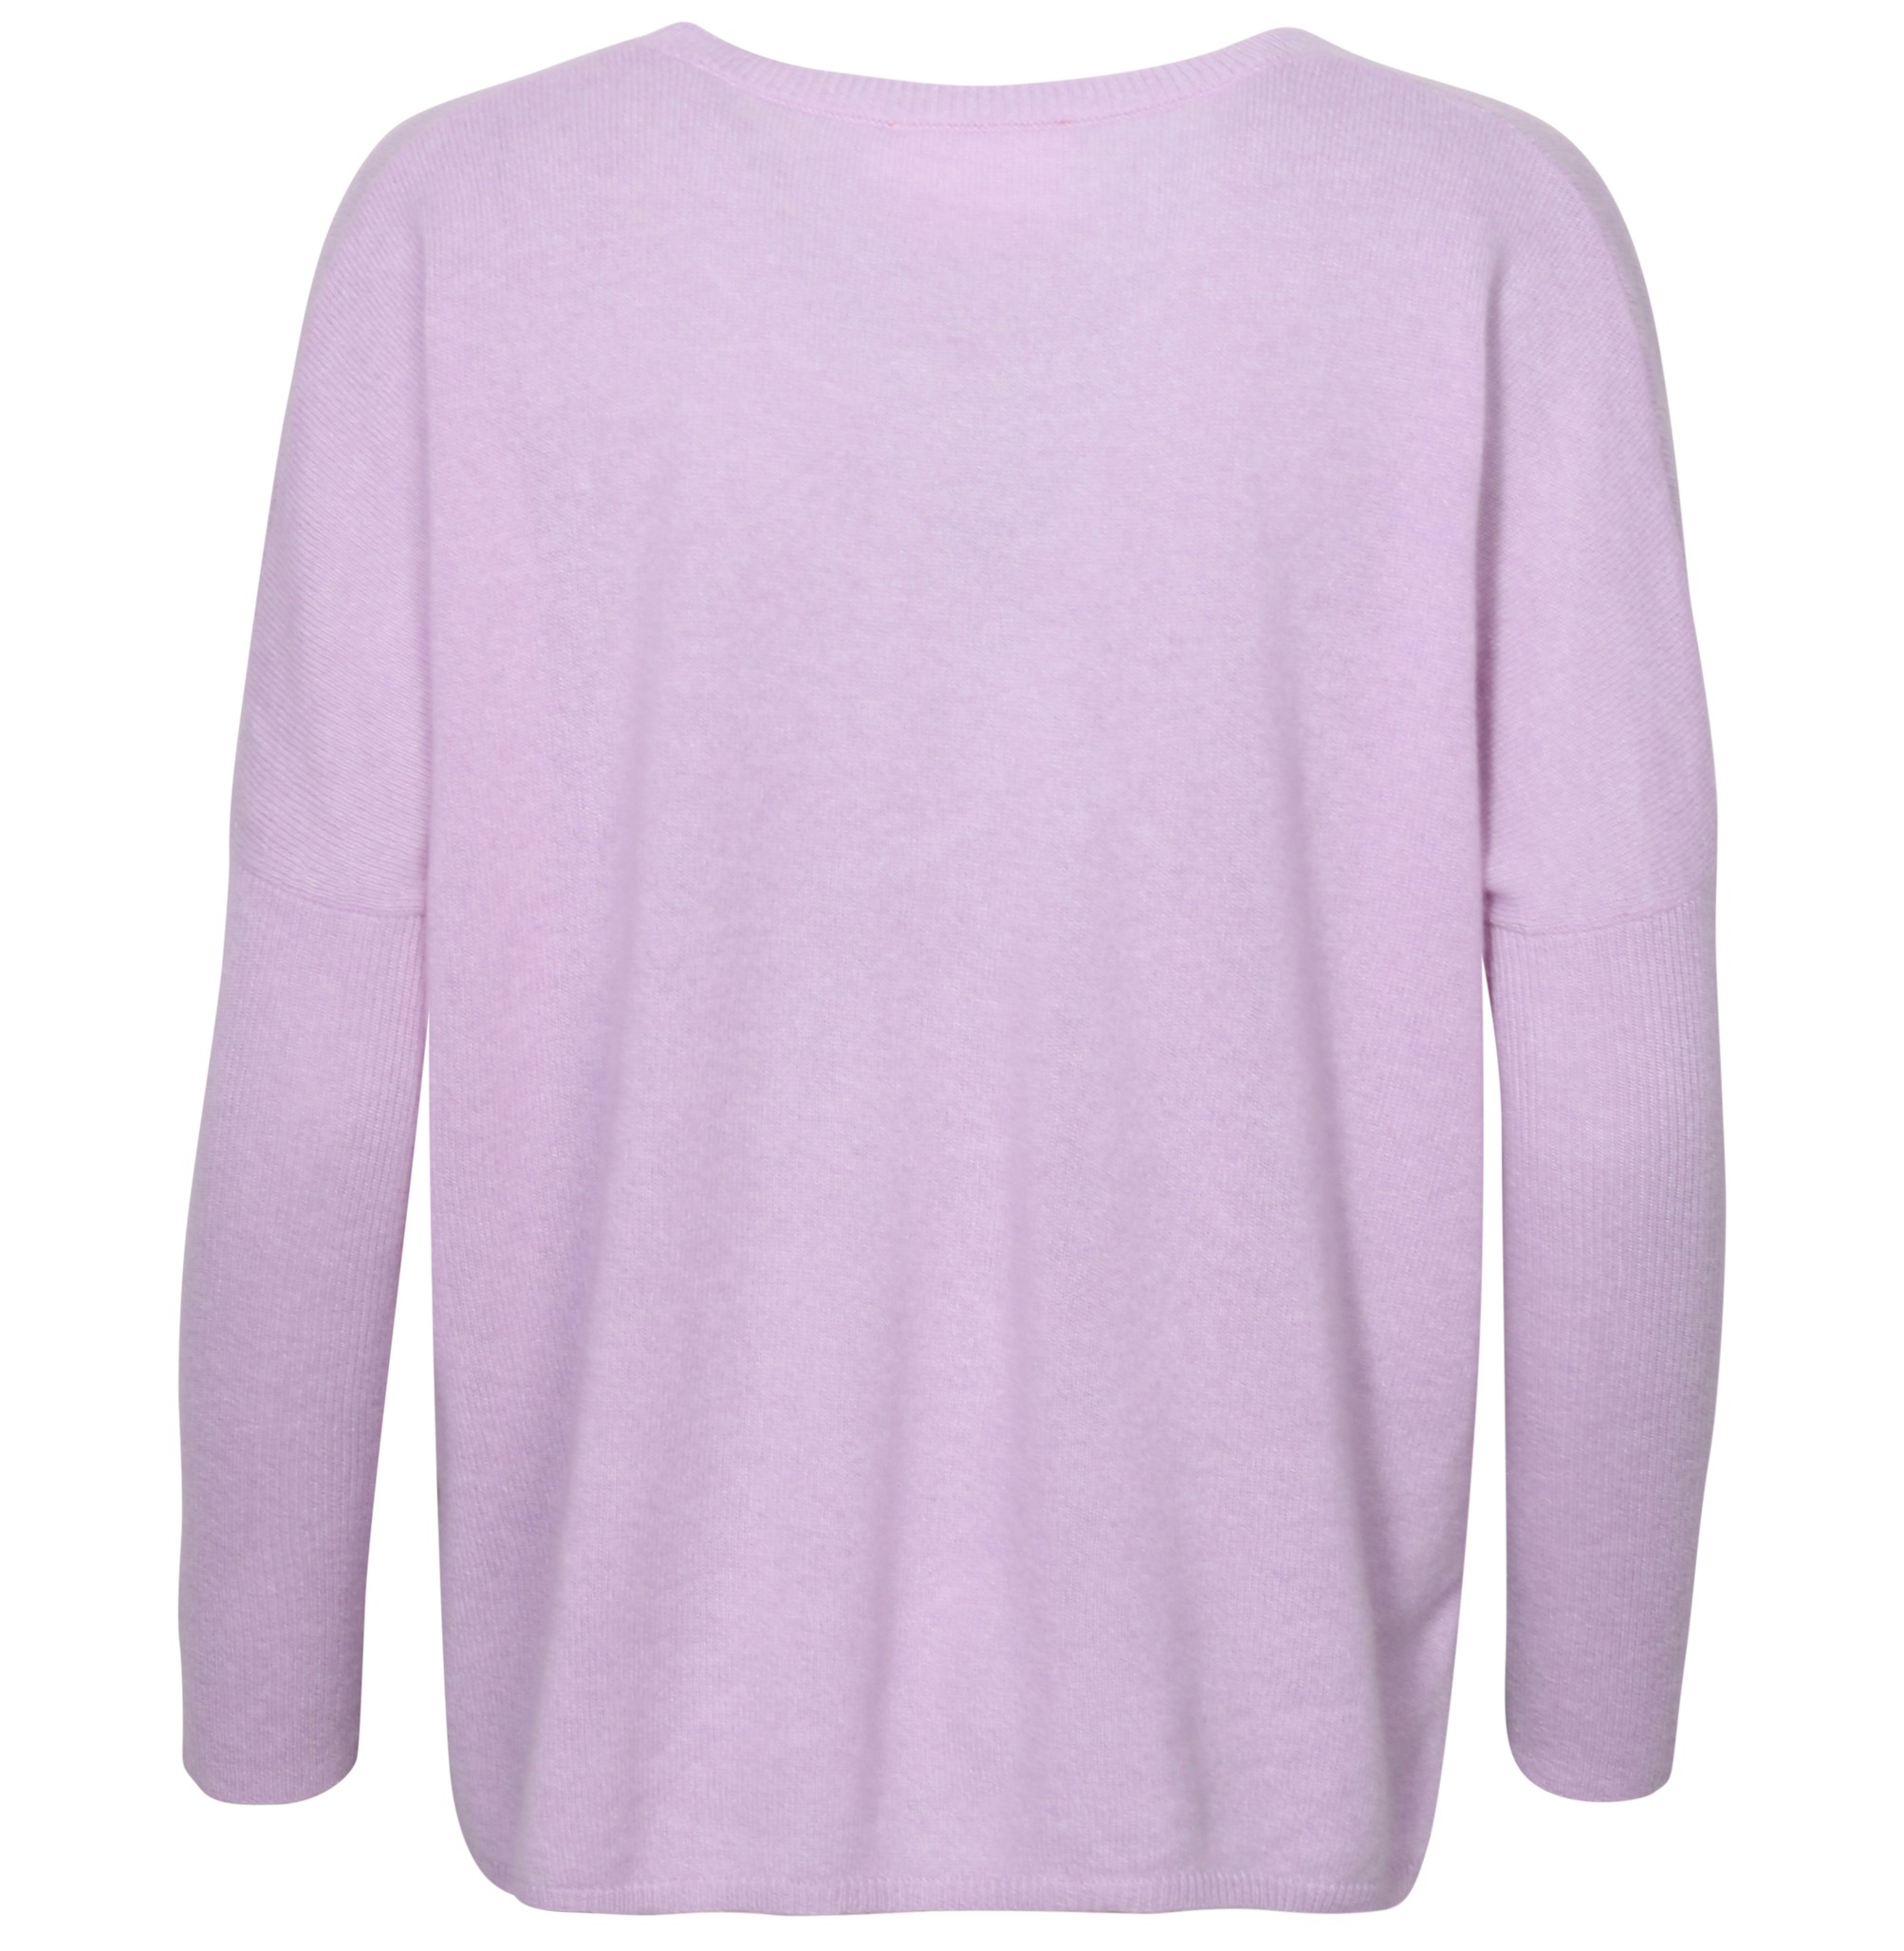 ABSOLUT CASHMERE Poncho Sweater Astrid in Light Lilac S